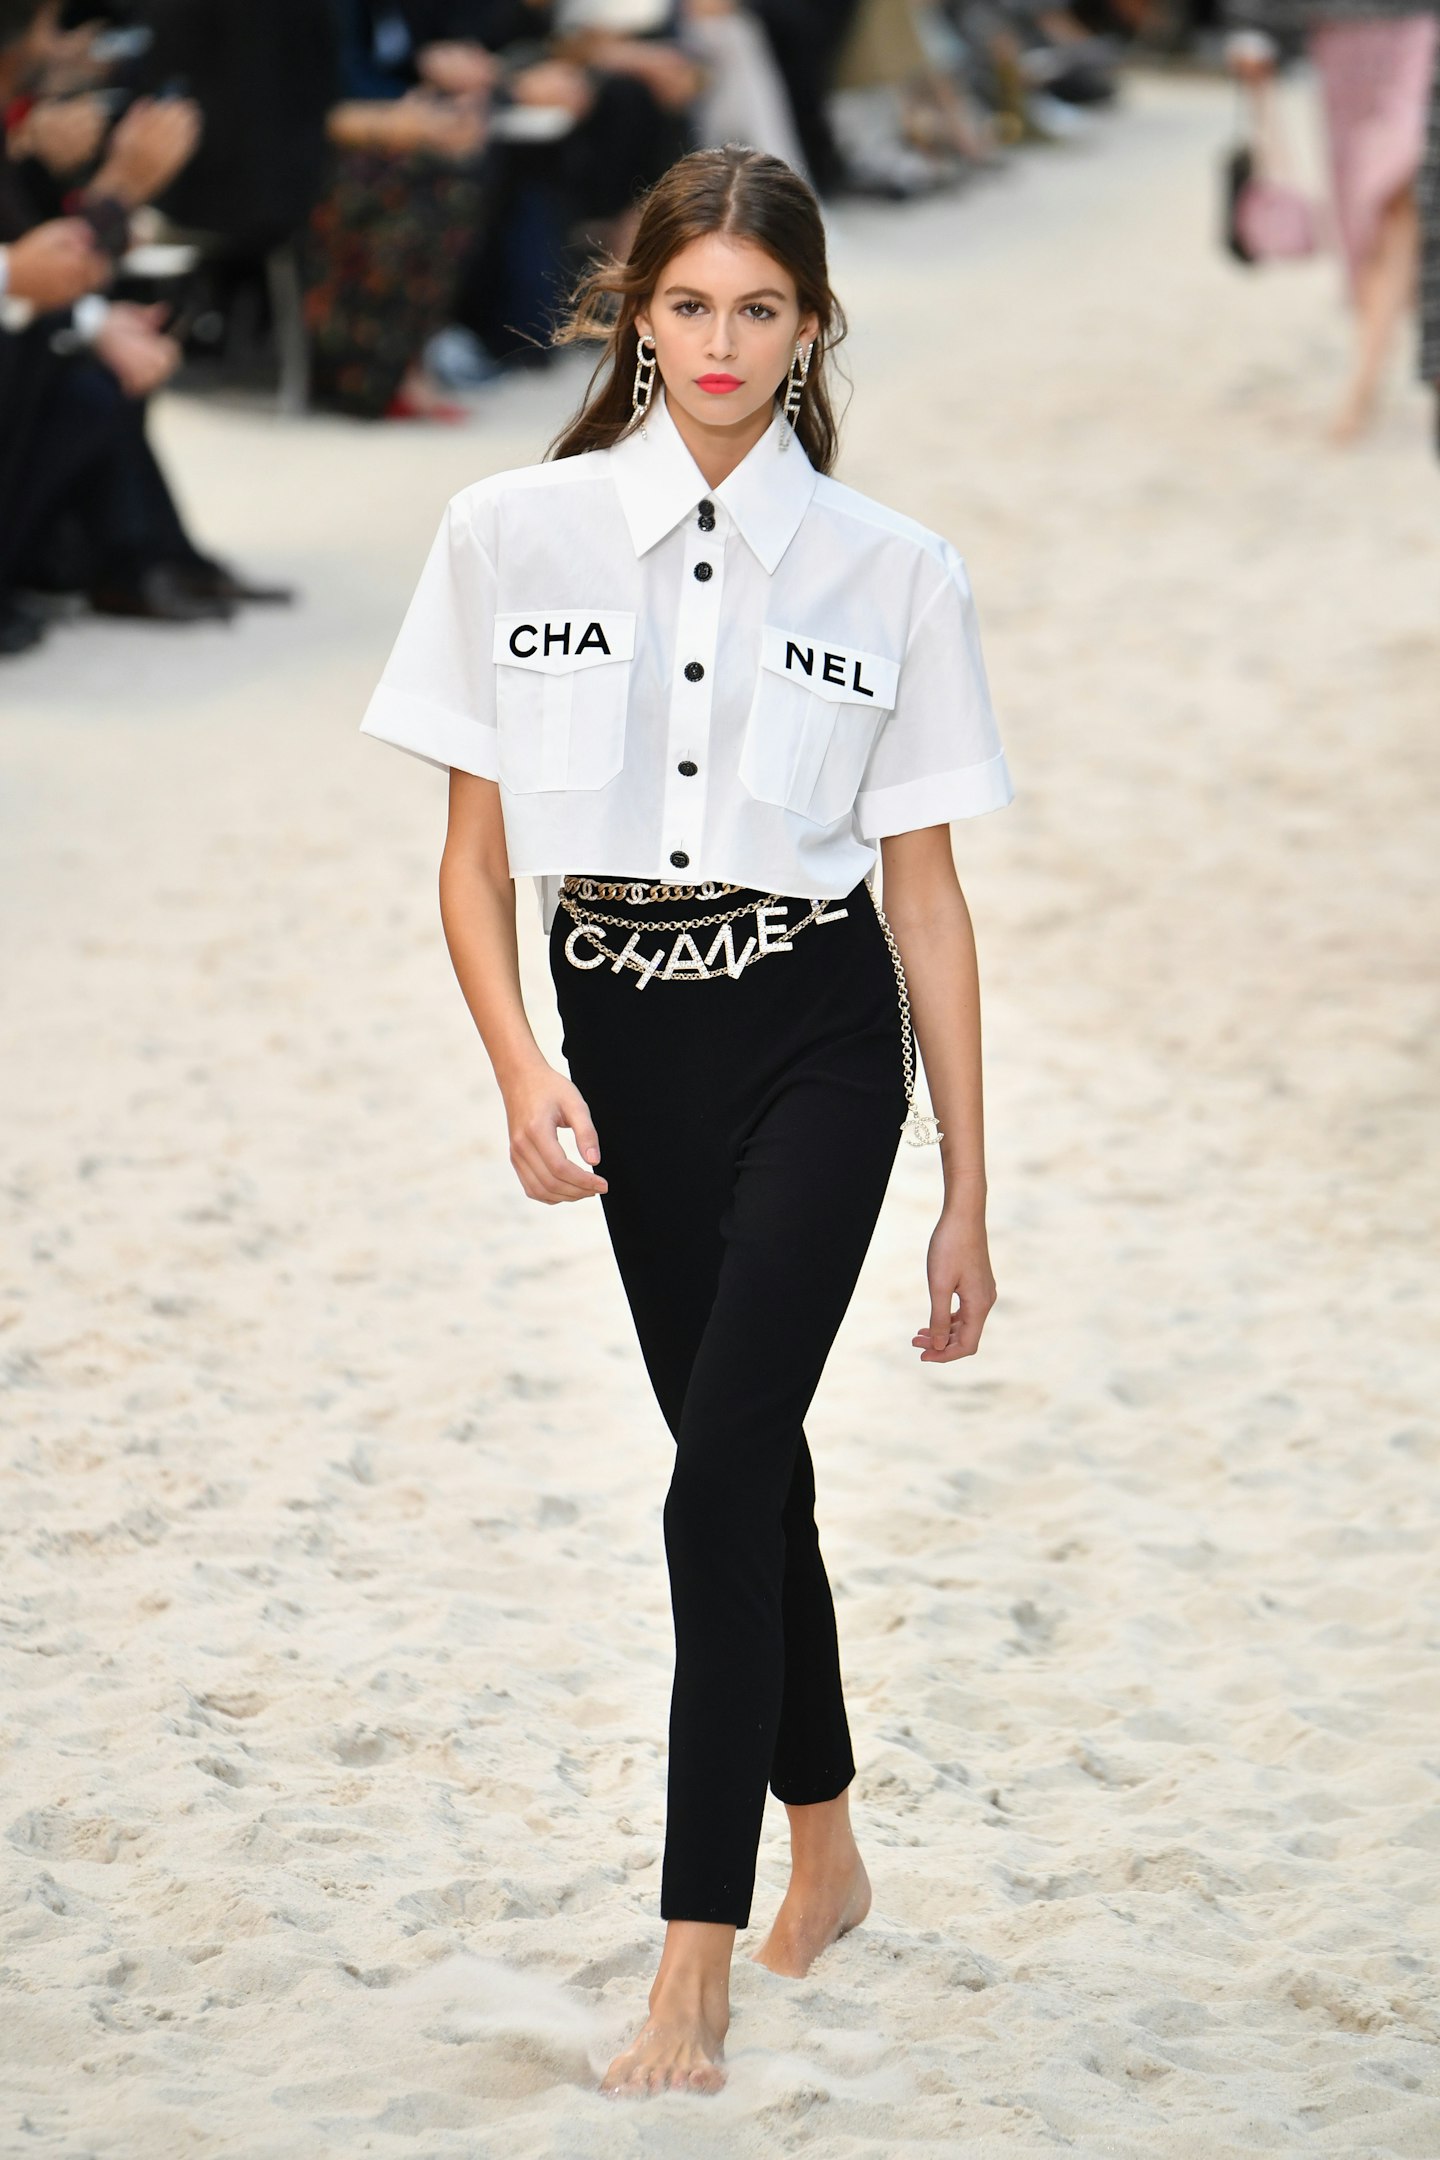 karl lagerfeld's imagination came to life at chanel fashion shows